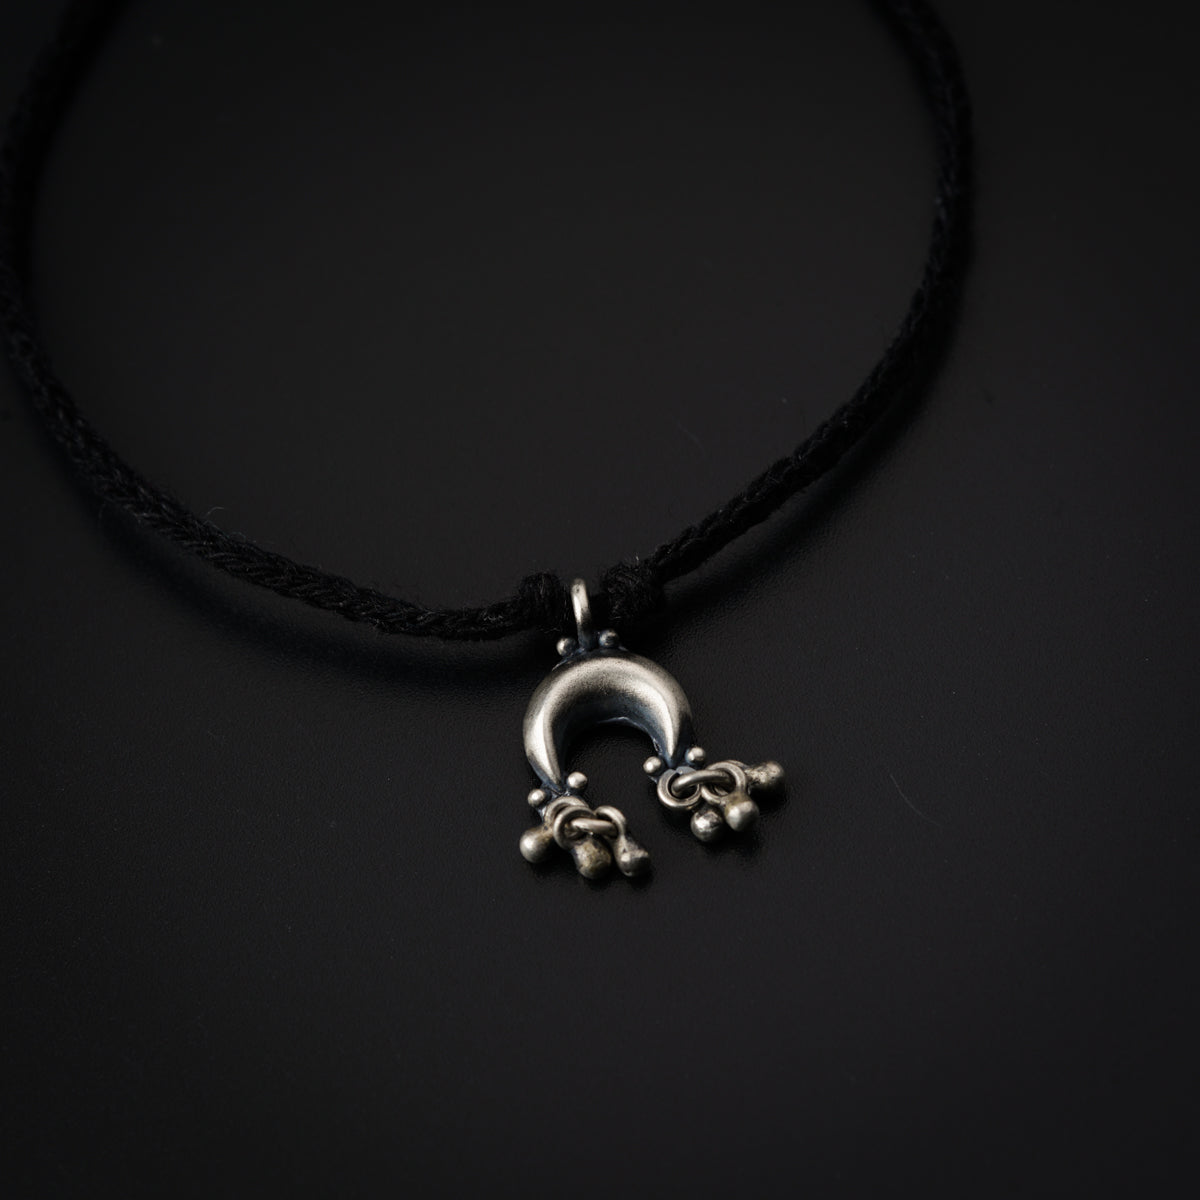 a black cord necklace with a silver pendant on it